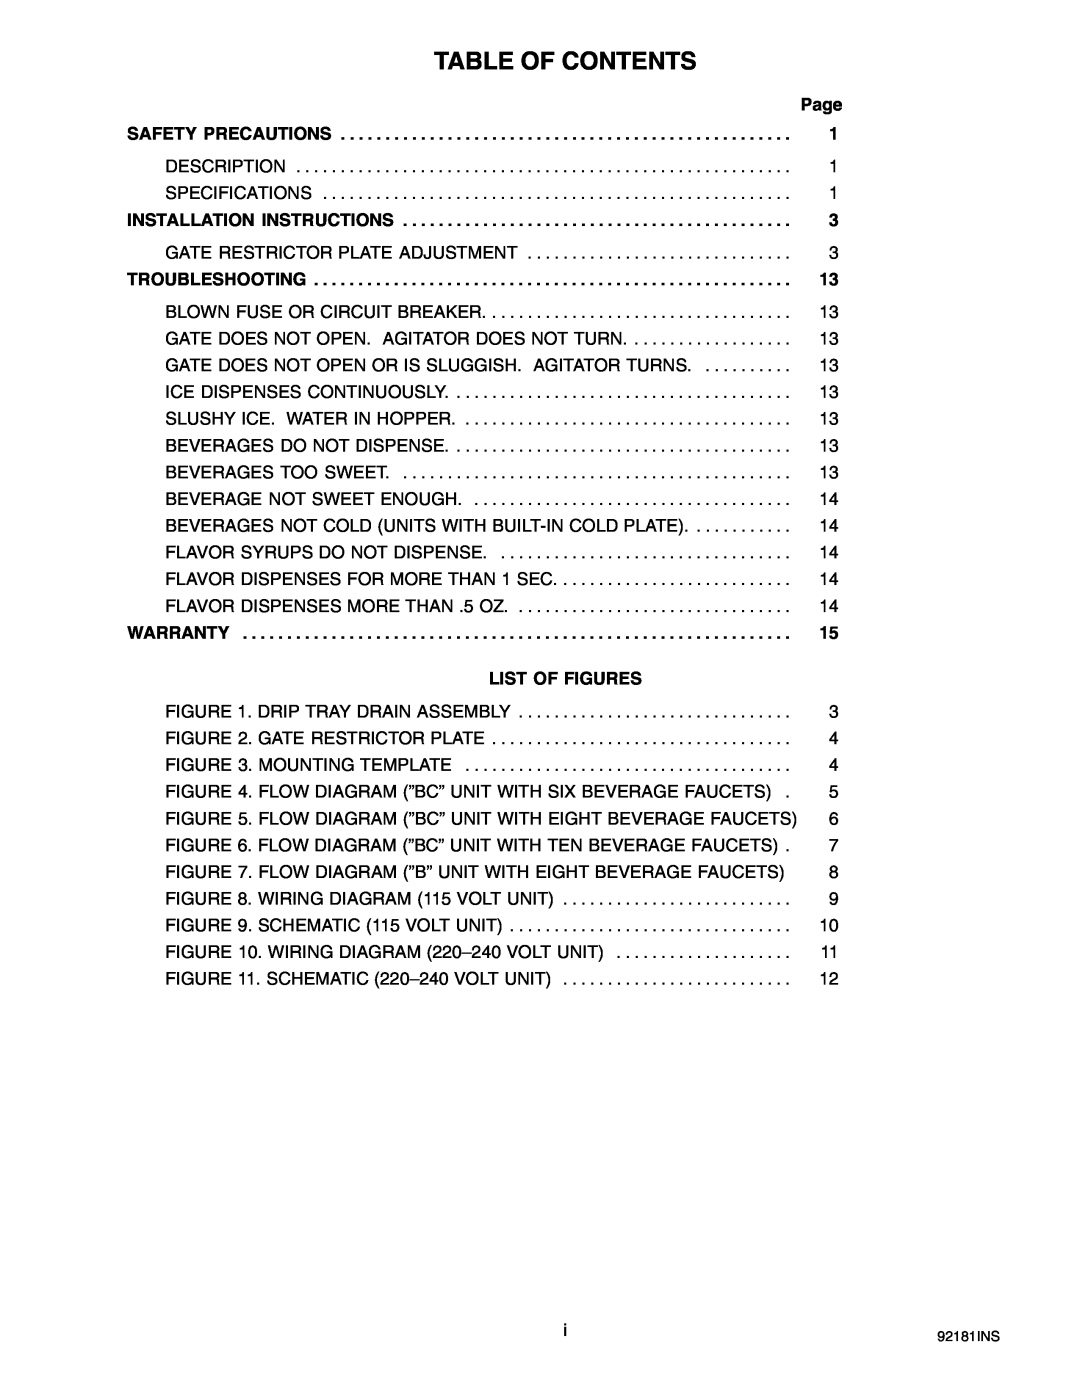 Cornelius Enduro-200/250 installation manual Table Of Contents, Page, List Of Figures 